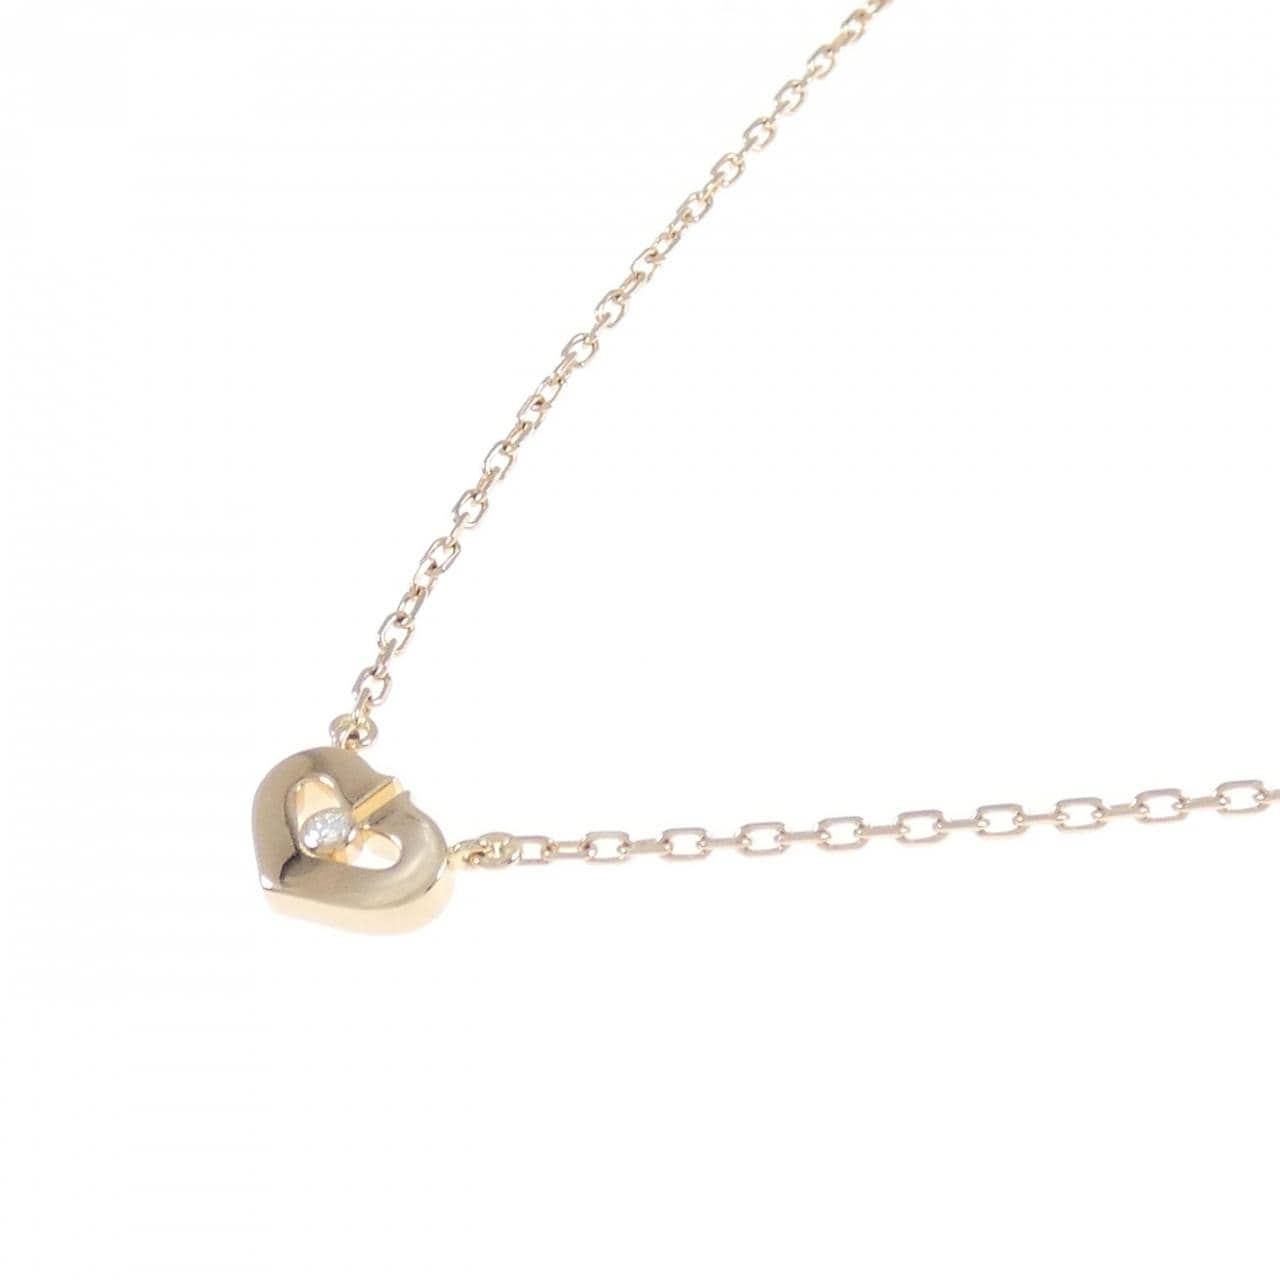 Cartier C heart small necklace